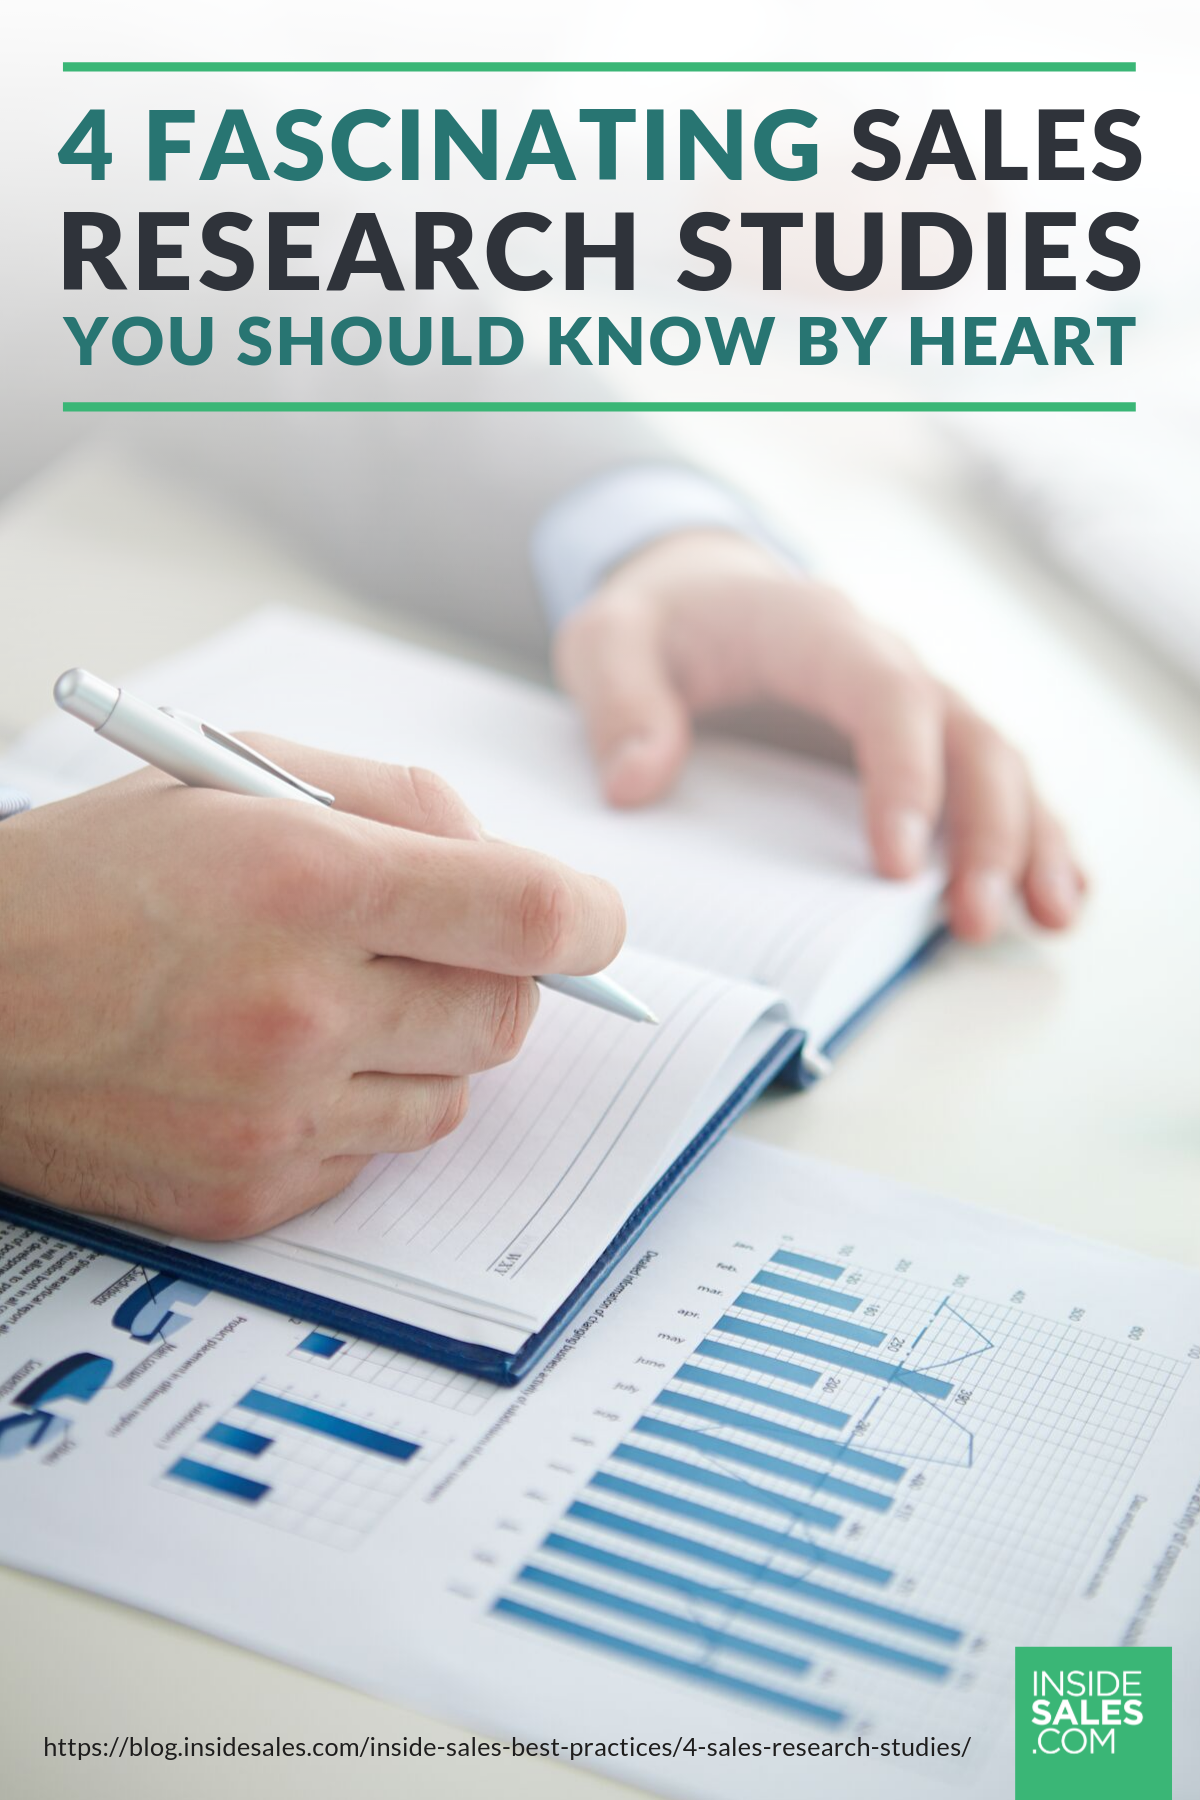 4 Fascinating Sales Research Studies You Should Know By Heart https://www.insidesales.com/blog/inside-sales-best-practices/4-sales-research-studies/